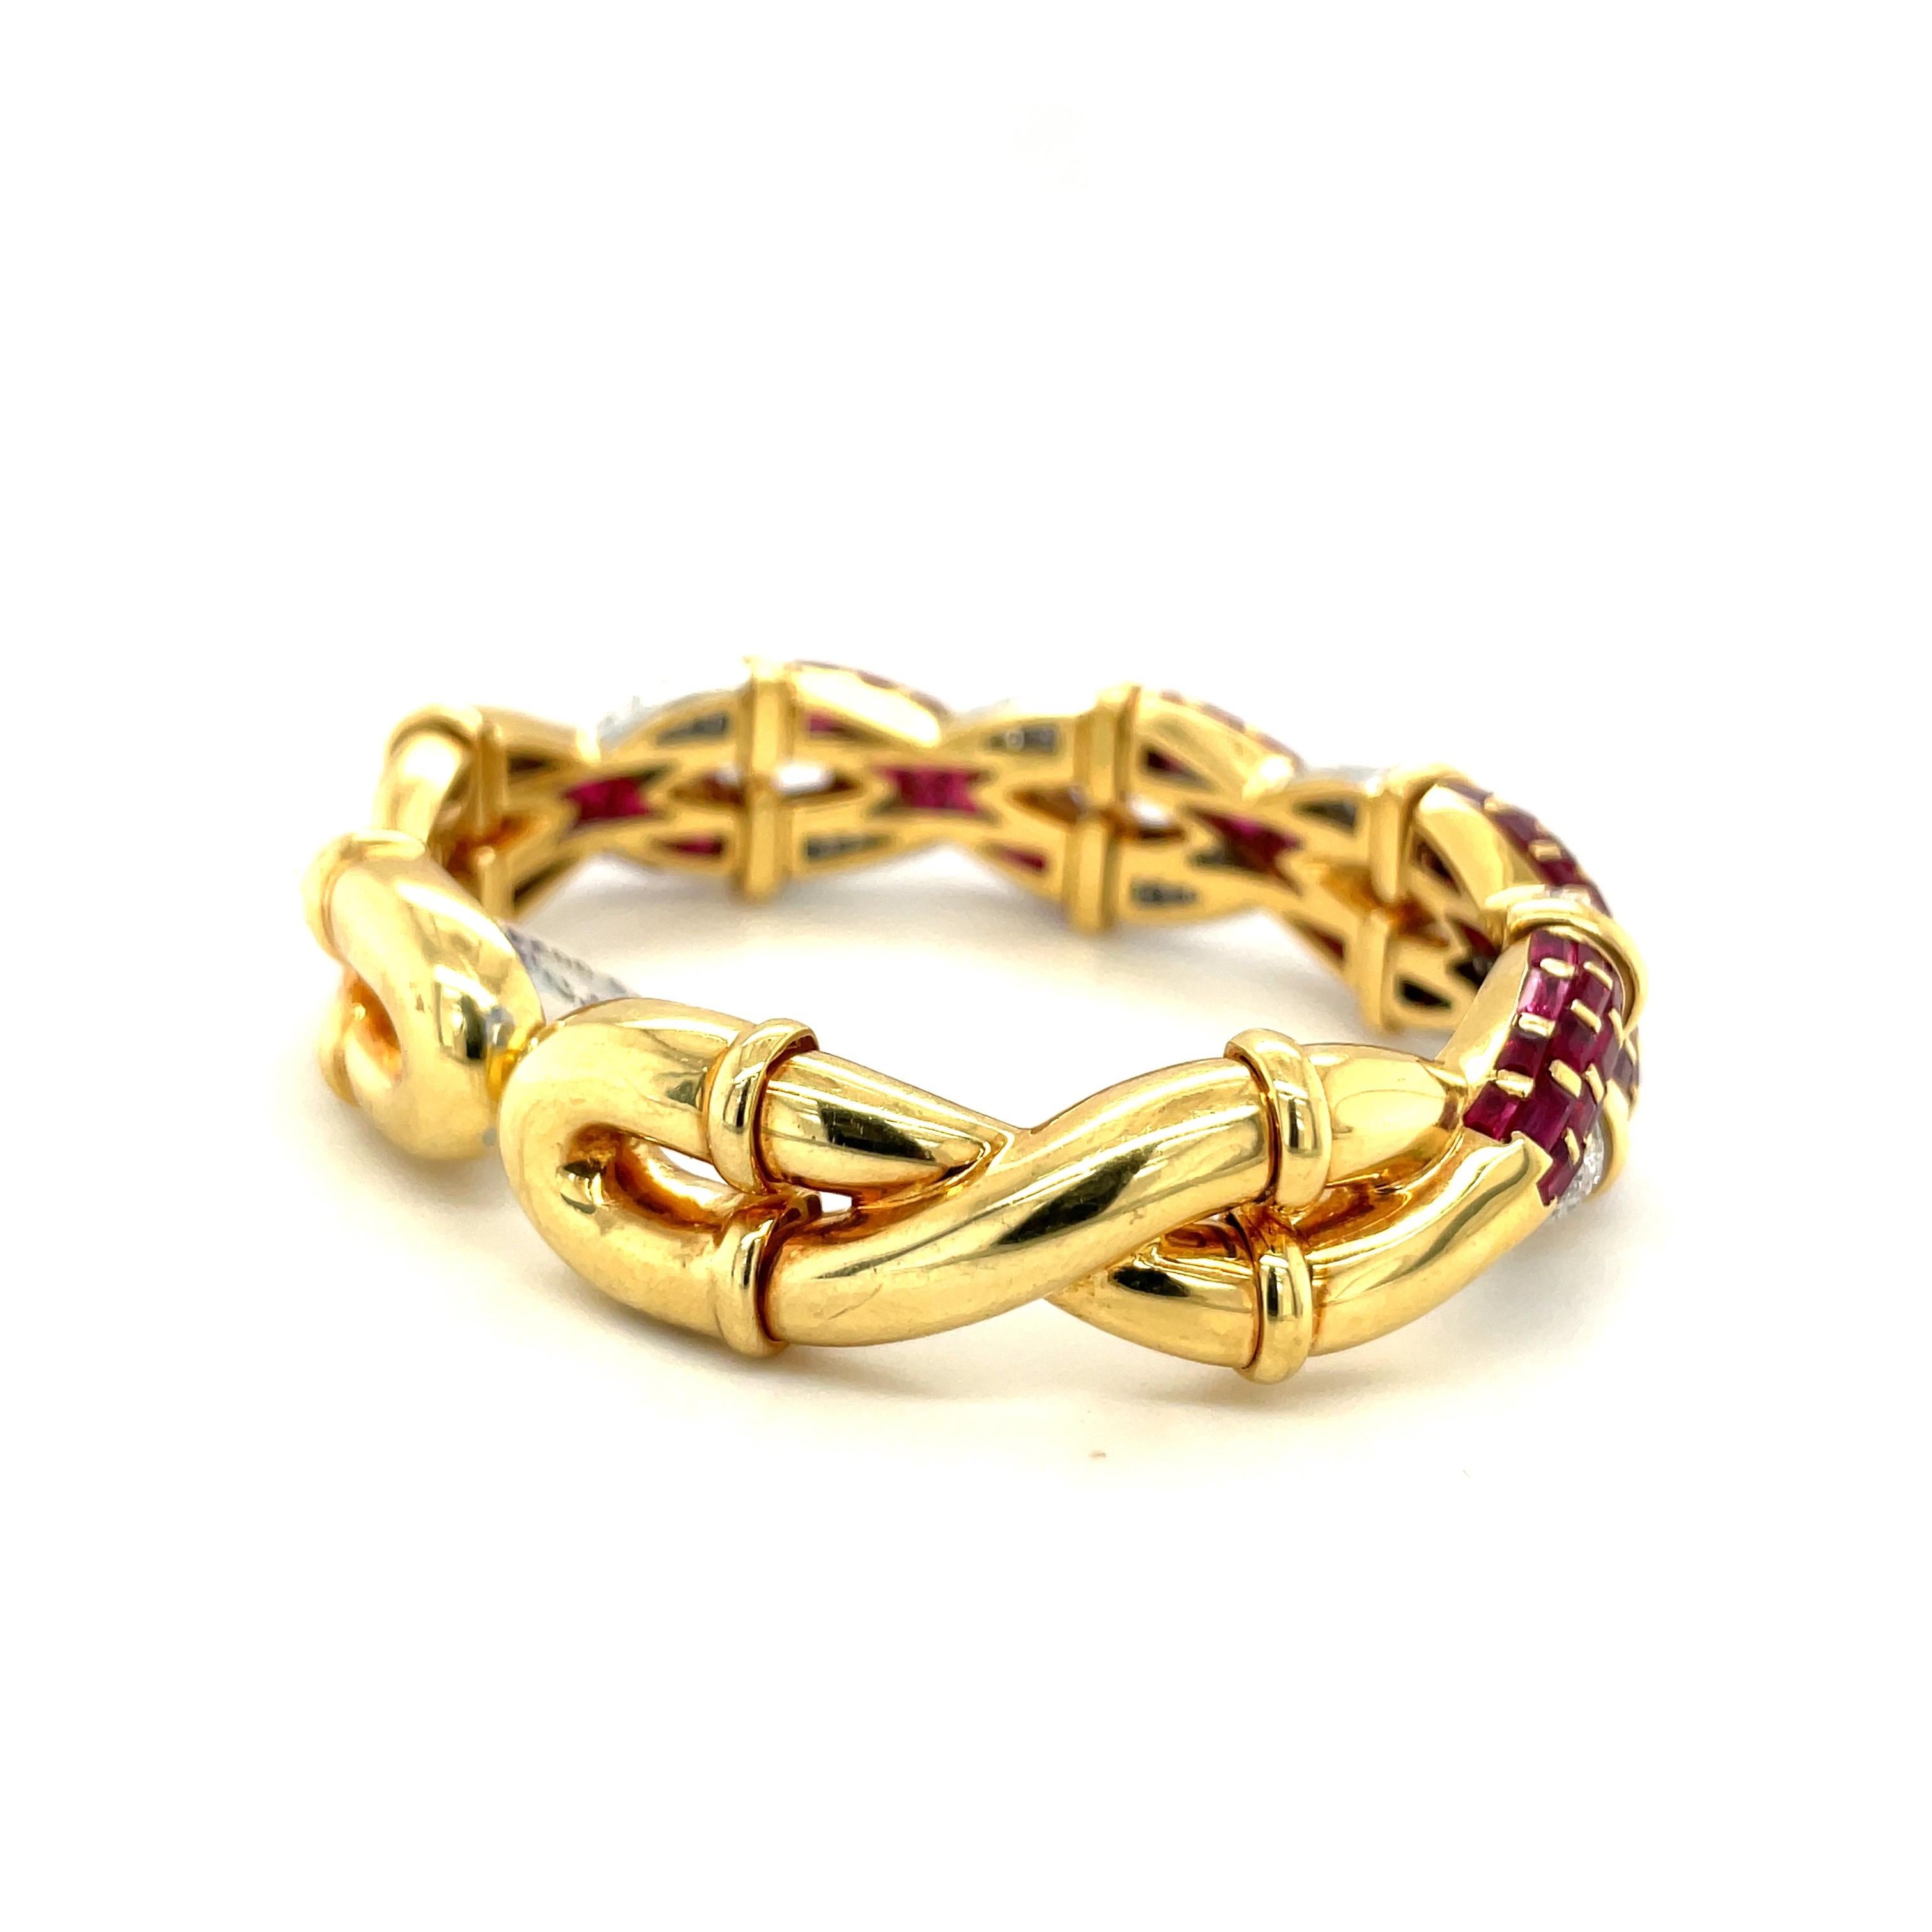 Contemporary R.C.M. 18KT Yellow Gold 13.39Ct Ruby 1.70Ct Diamond Braided Cuff Bracelet For Sale